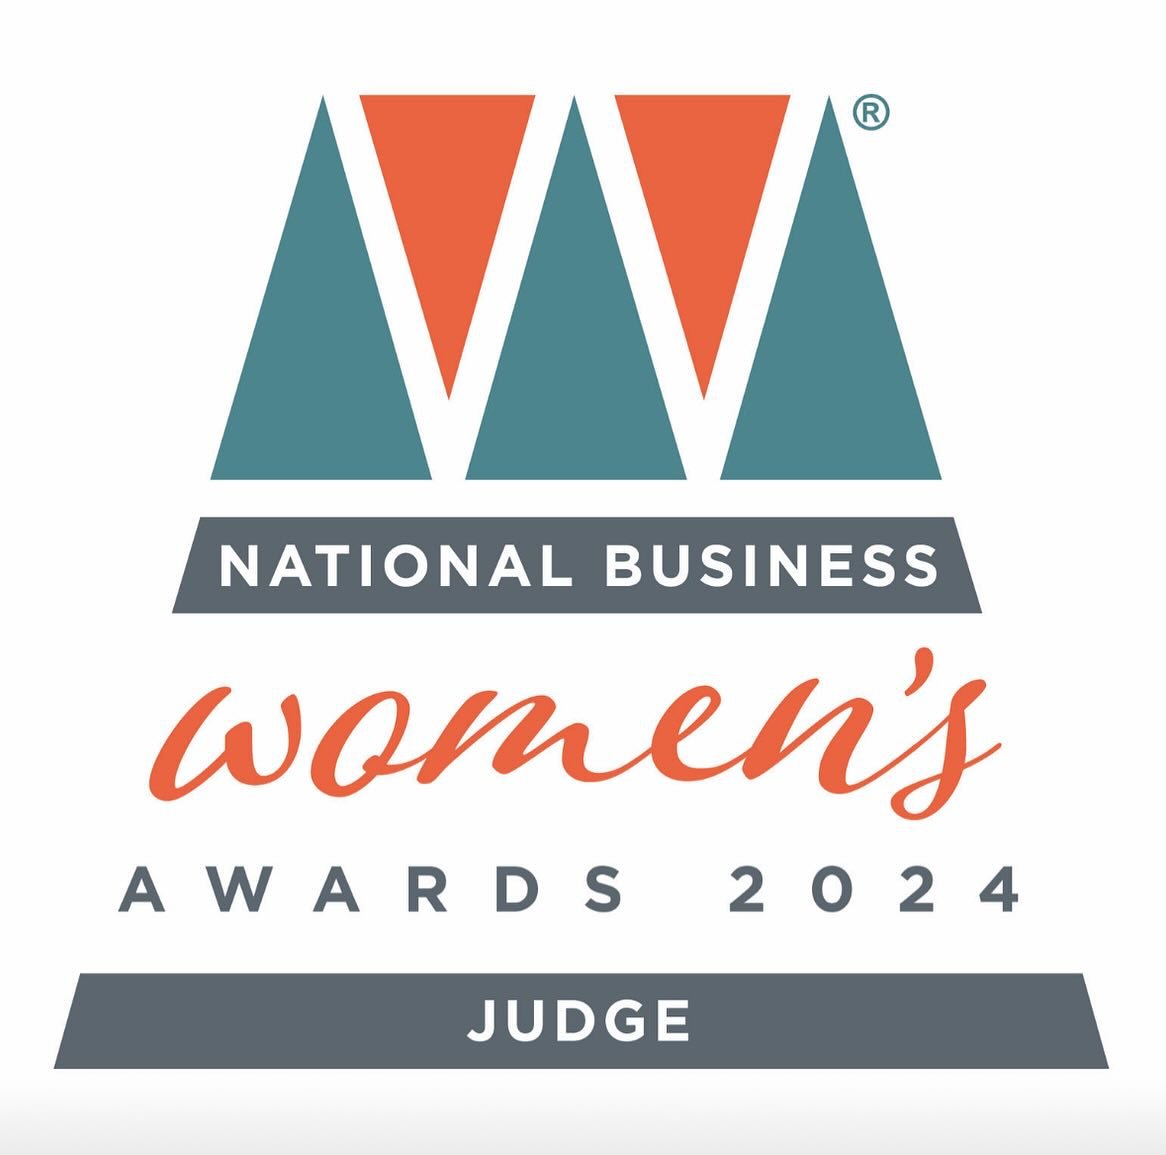 Im excited be a judge and a sponsor for &lsquo;National Business Women&rsquo;s Awards 2024&rsquo;

There is still time time to enter - The deadline for entries is Monday 17th June 2024 at 3pm.

There are so many women out there doing amazing things. 